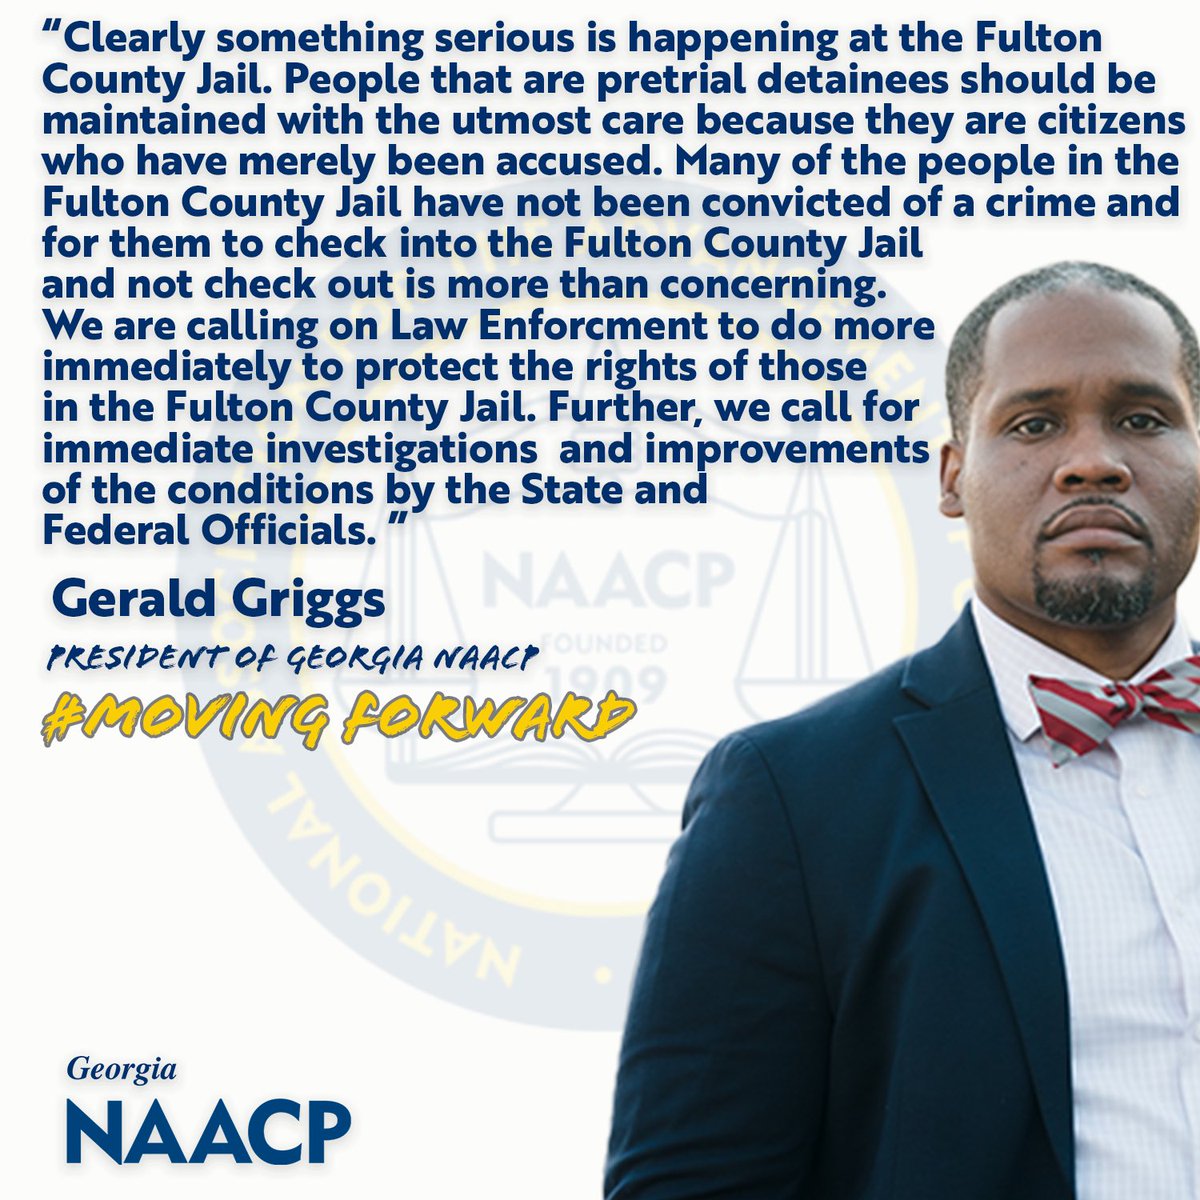 #NAACP issues a statement concerning the conditions at the #FultonCountyJail and the increasing number of in-custody deaths. #atlpol #gapol #GeorgiaNAACP